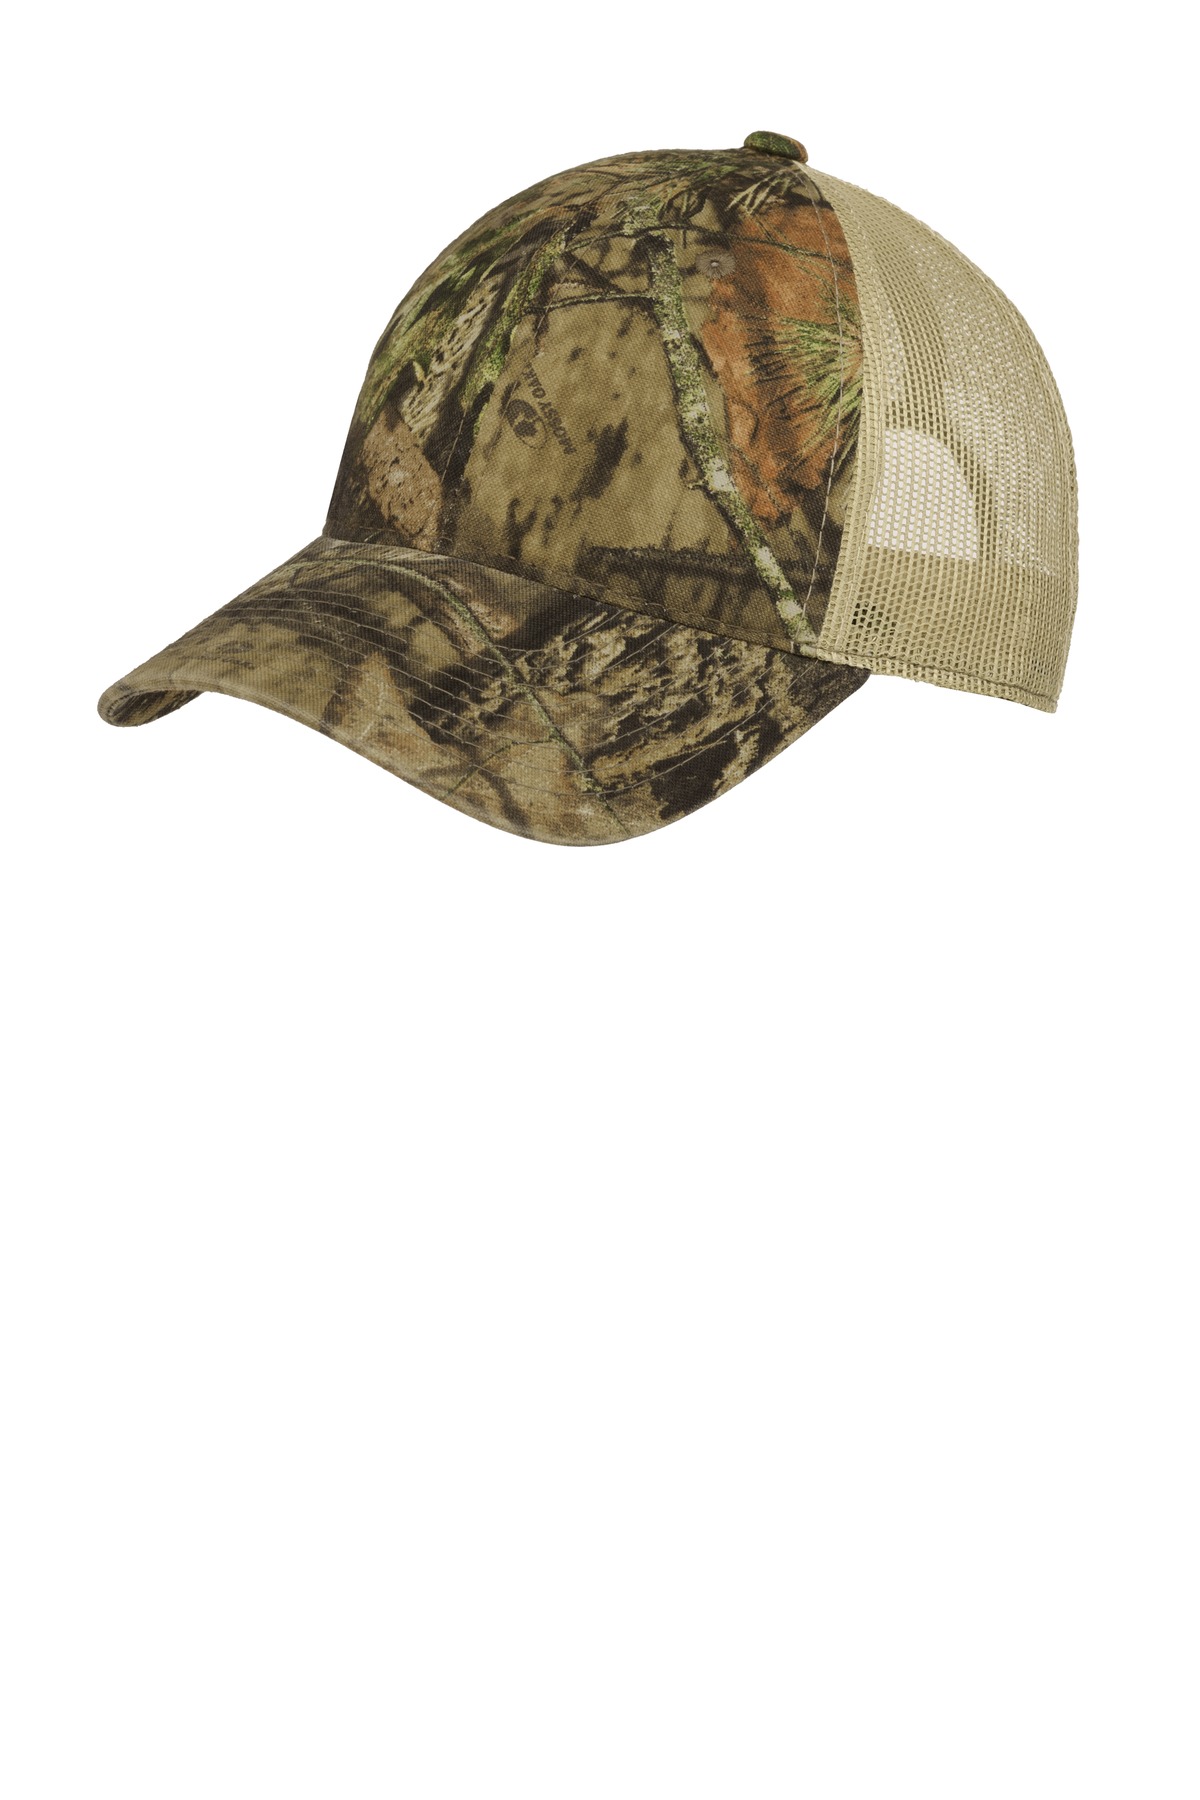 Port Authority Unstructured Camouflage Mesh Back Cap-